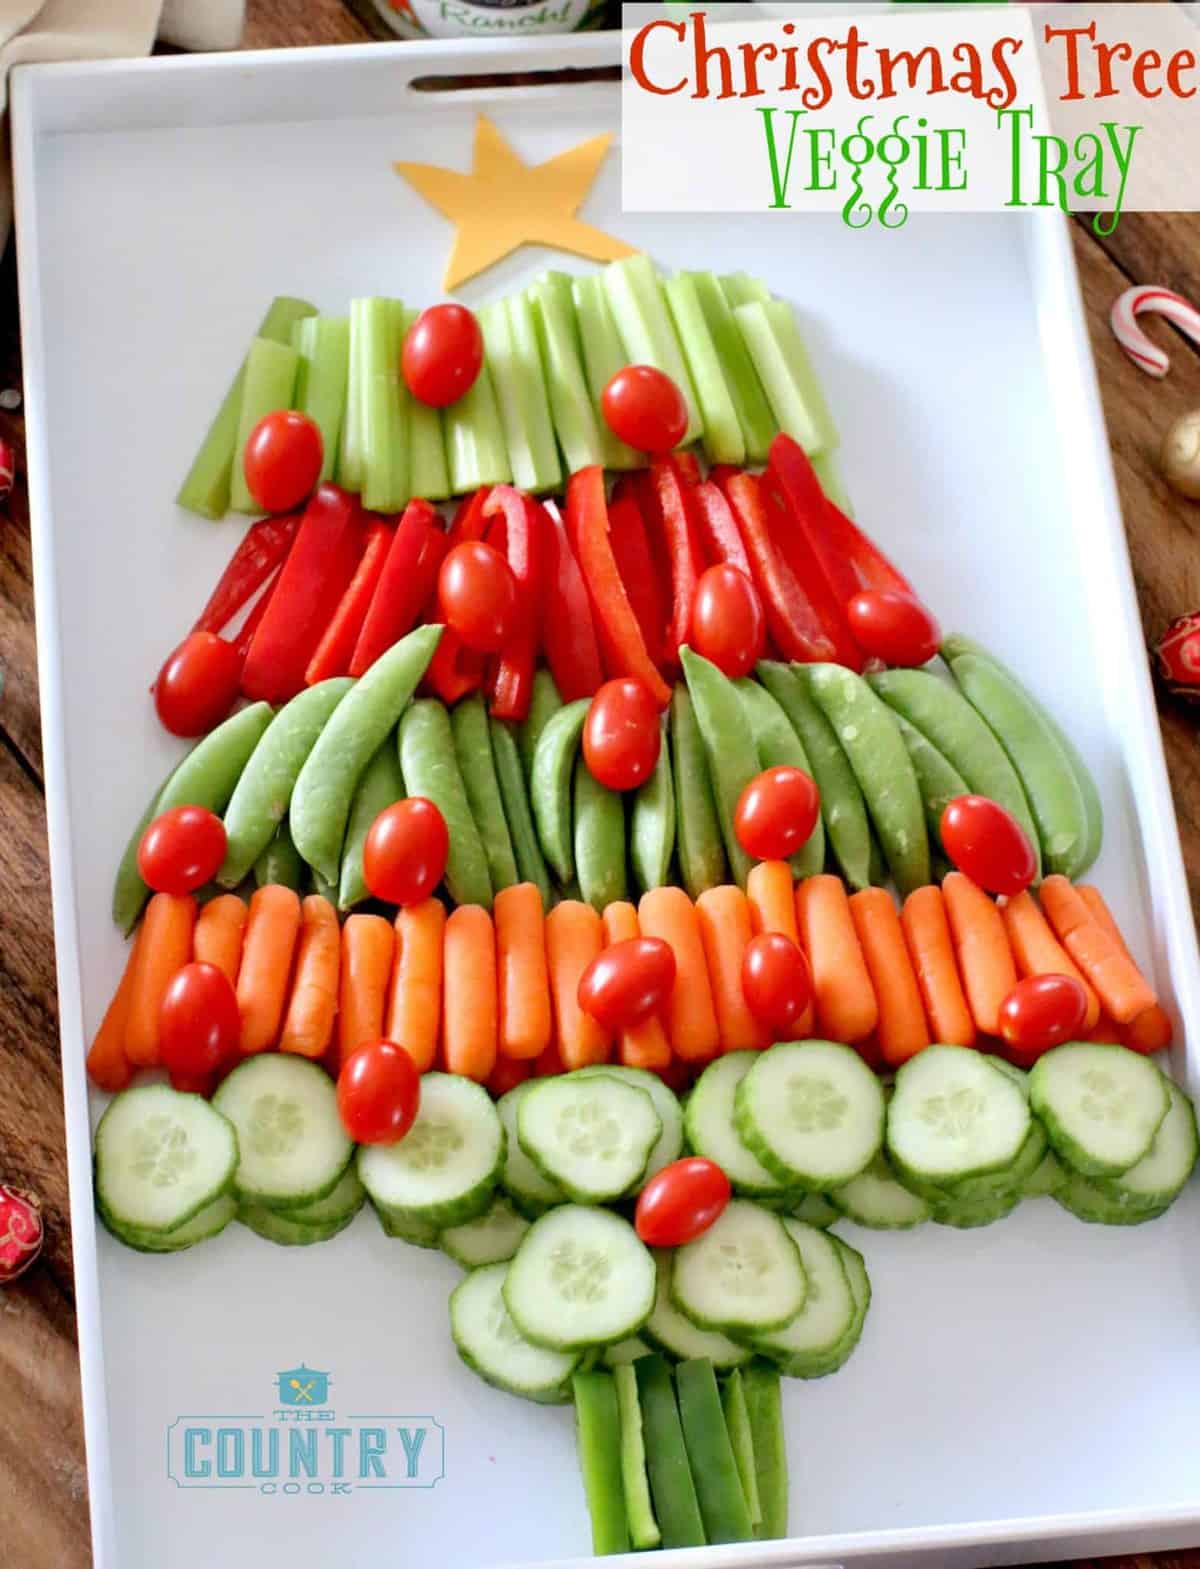 A vegetable tray shaped like a Christmas Tree on a white serving tray.